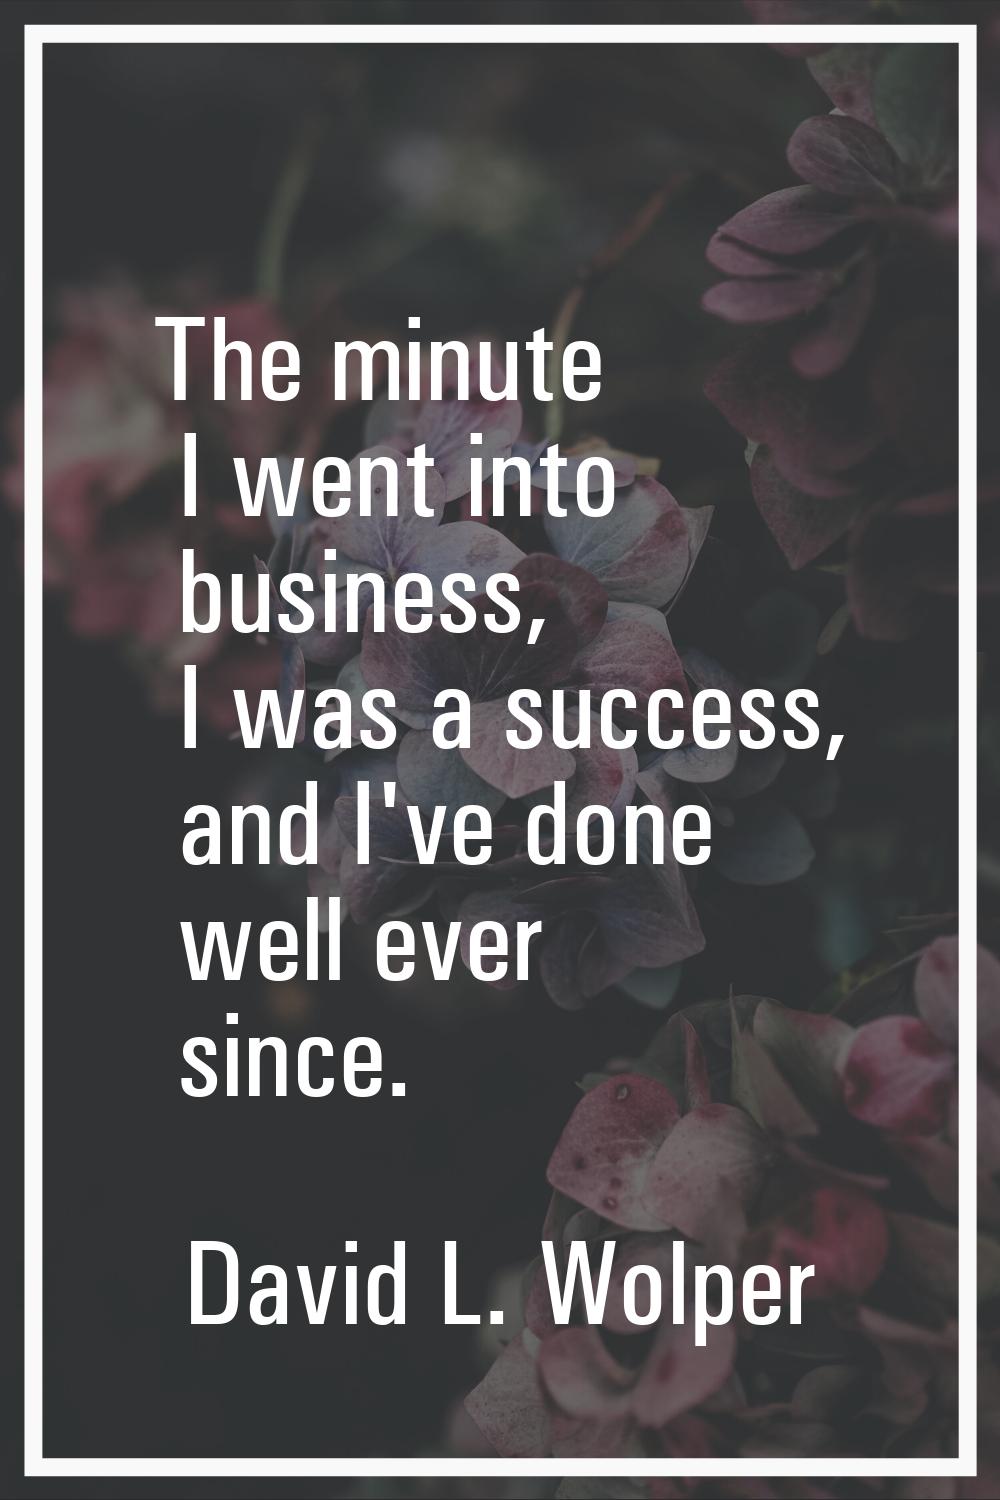 The minute I went into business, I was a success, and I've done well ever since.